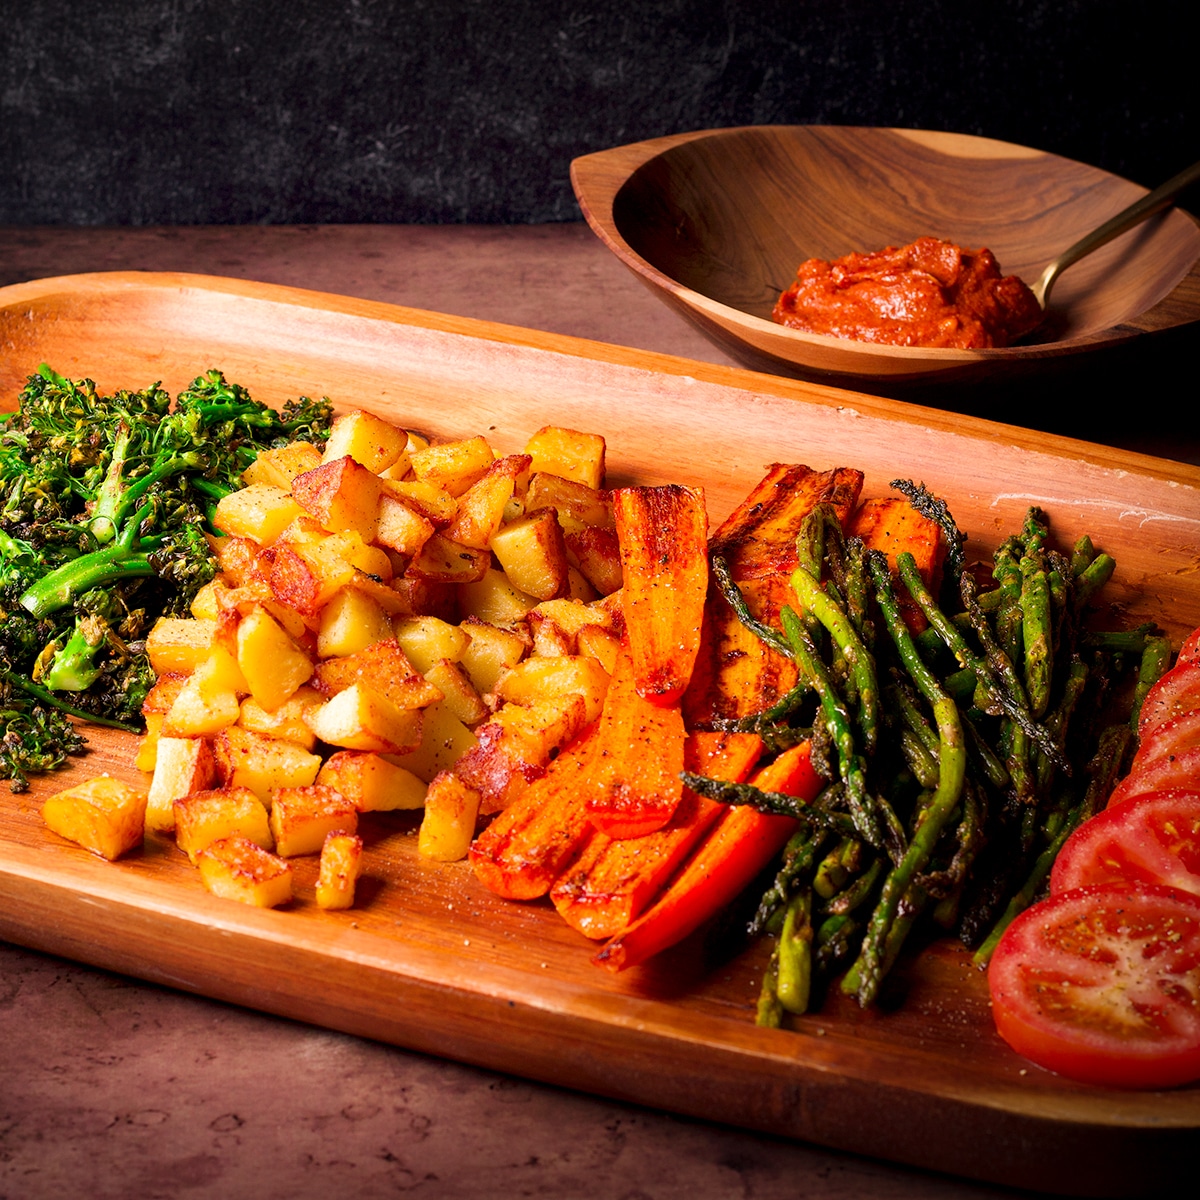 A tray of roasted vegetables sitting on the table next to a bowl of miso butter.